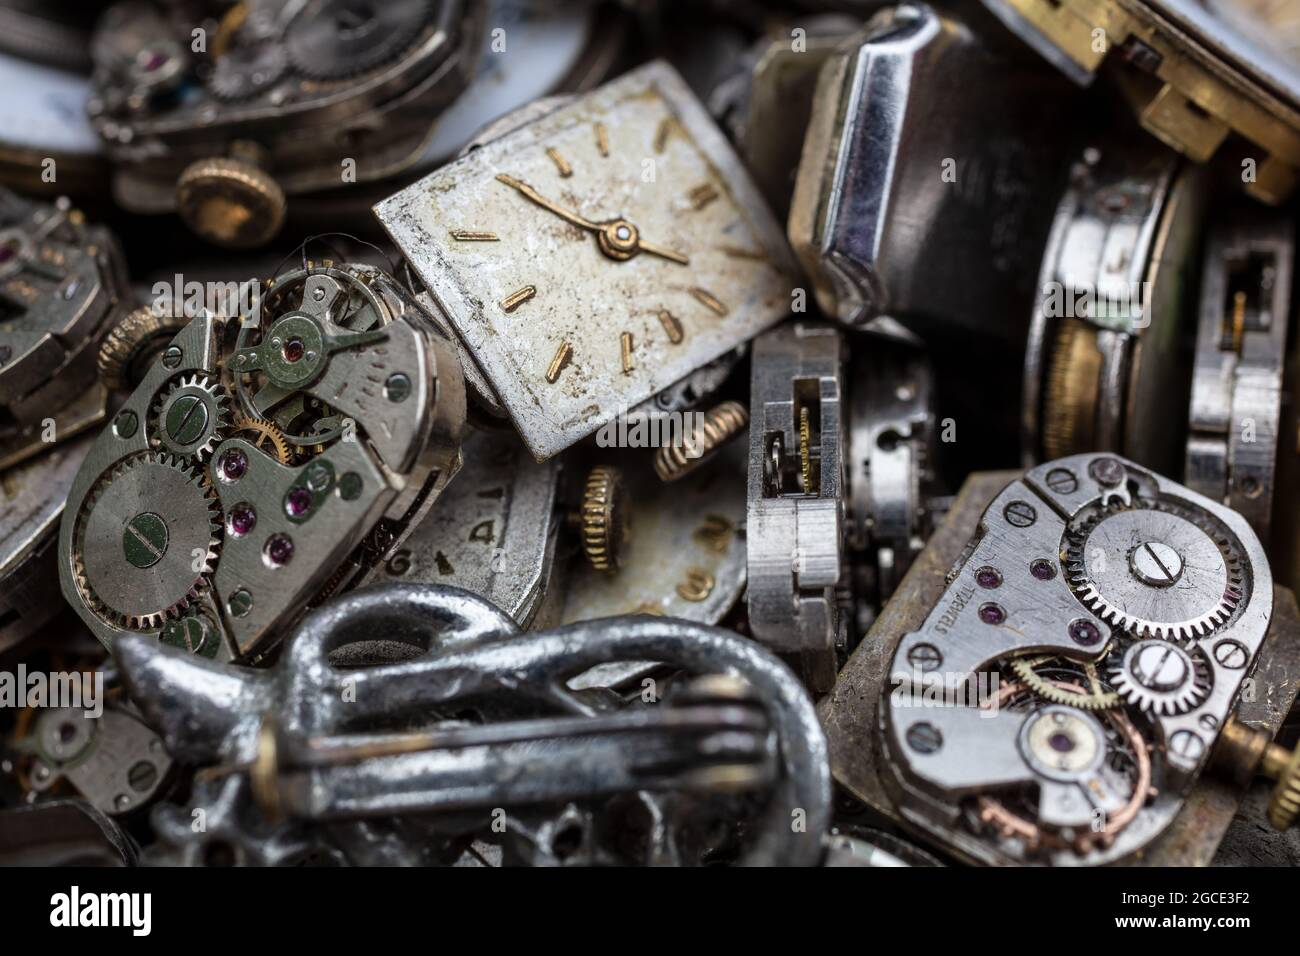 Macro close up of antique vintage broken watches, wrist watch or wristwatch movements and parts for repair. Time concept photograph. Stock Photo